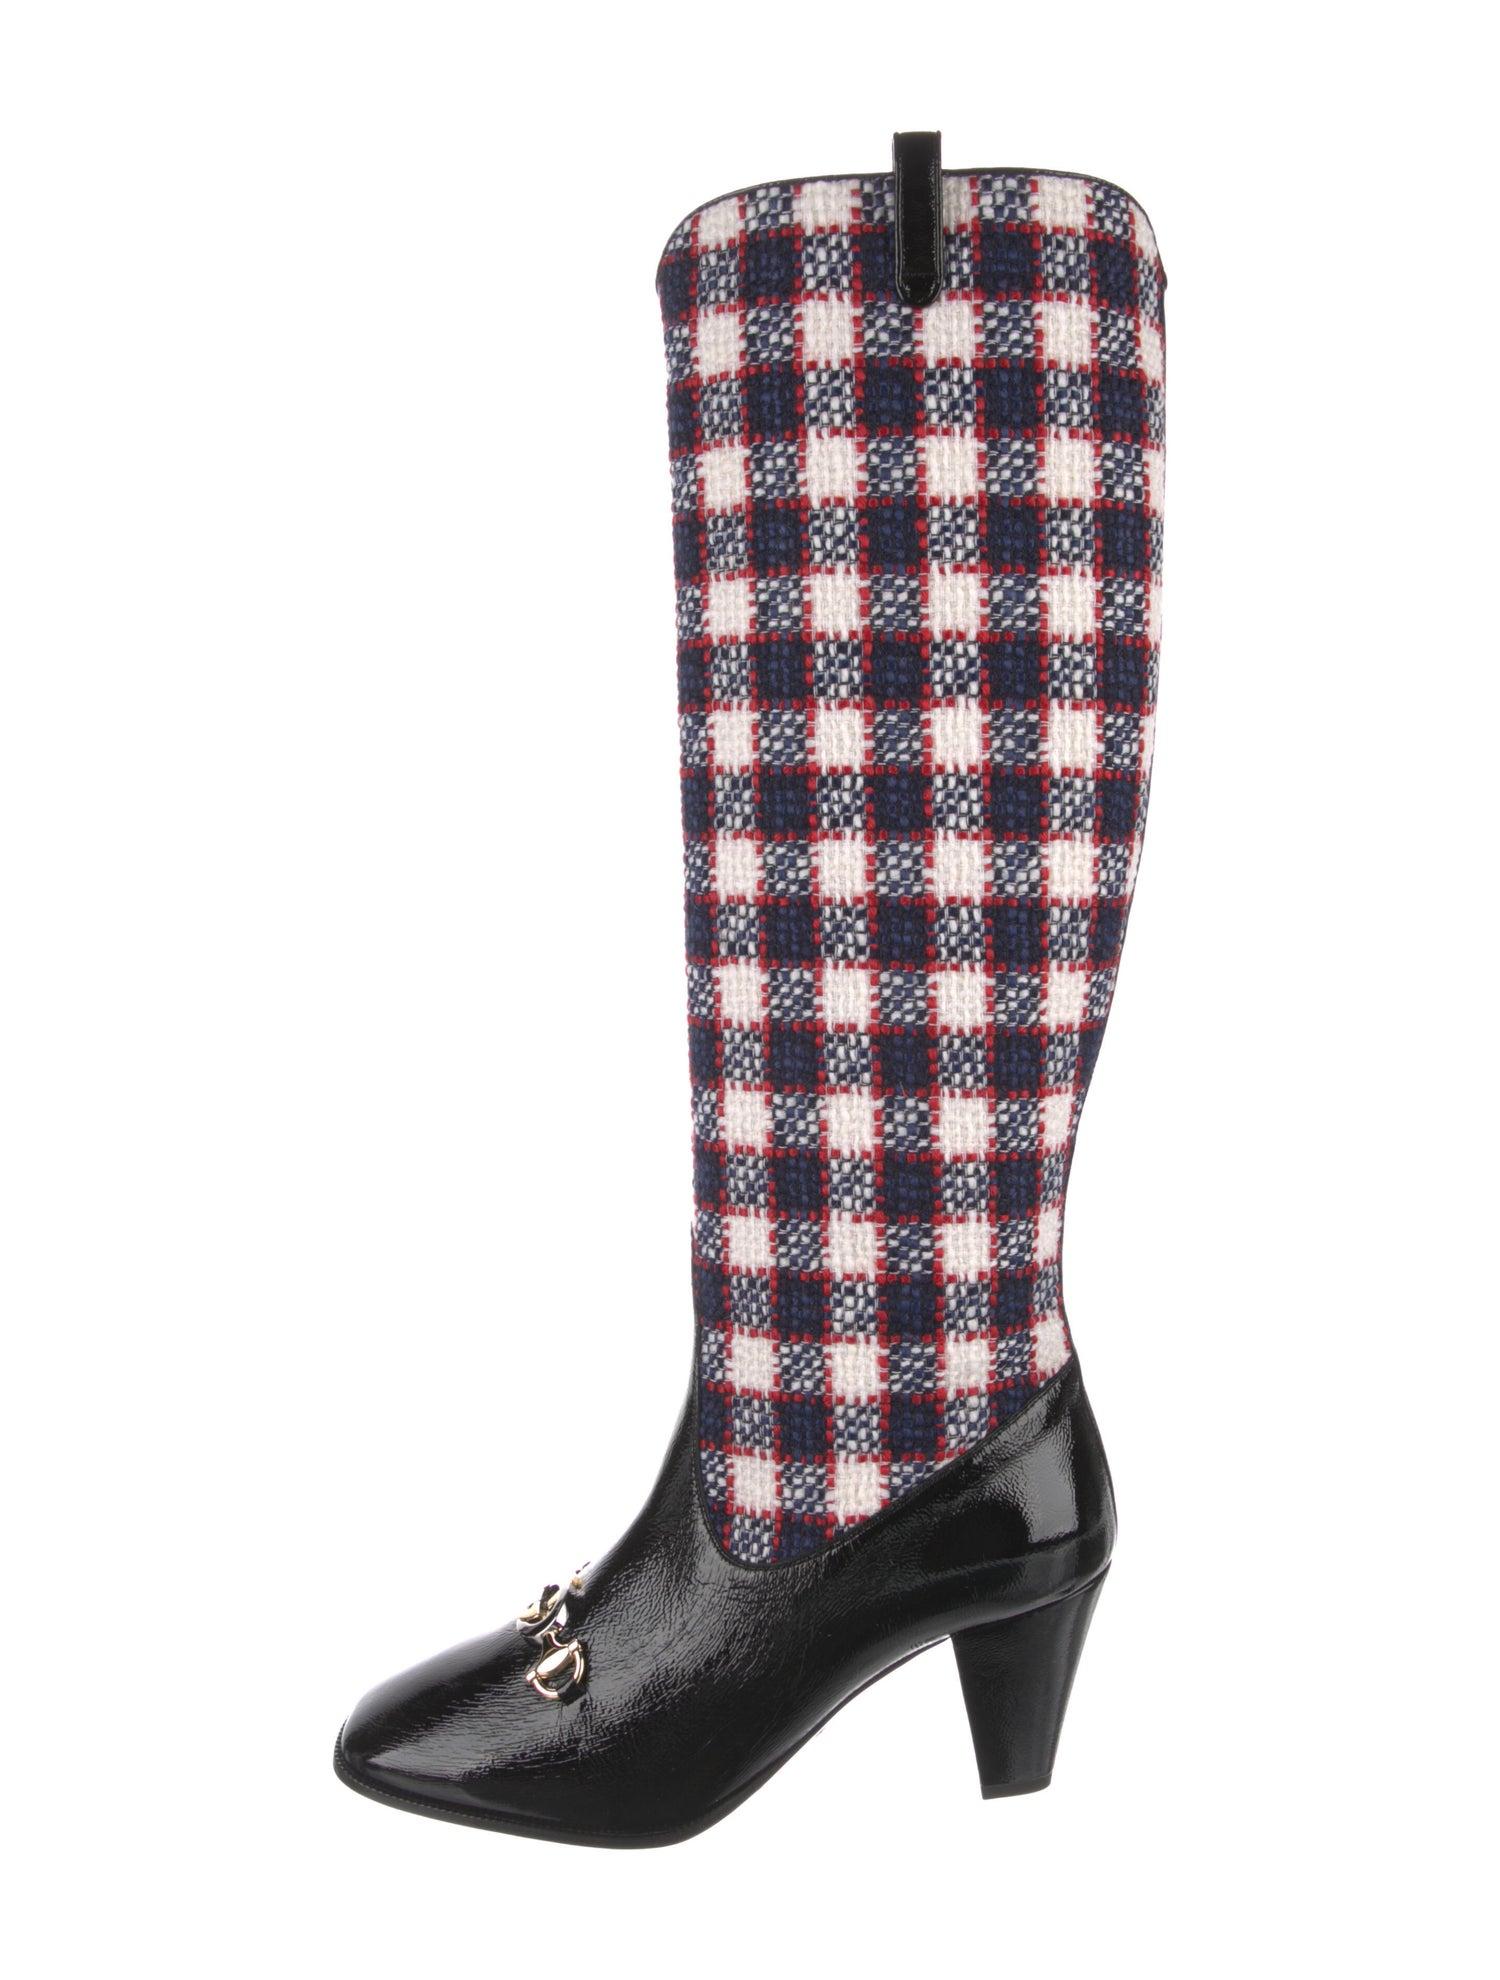 Women's New With Box Gucci 2019 Zumi Plaid Patent and Wool Boots Sz 39 For Sale